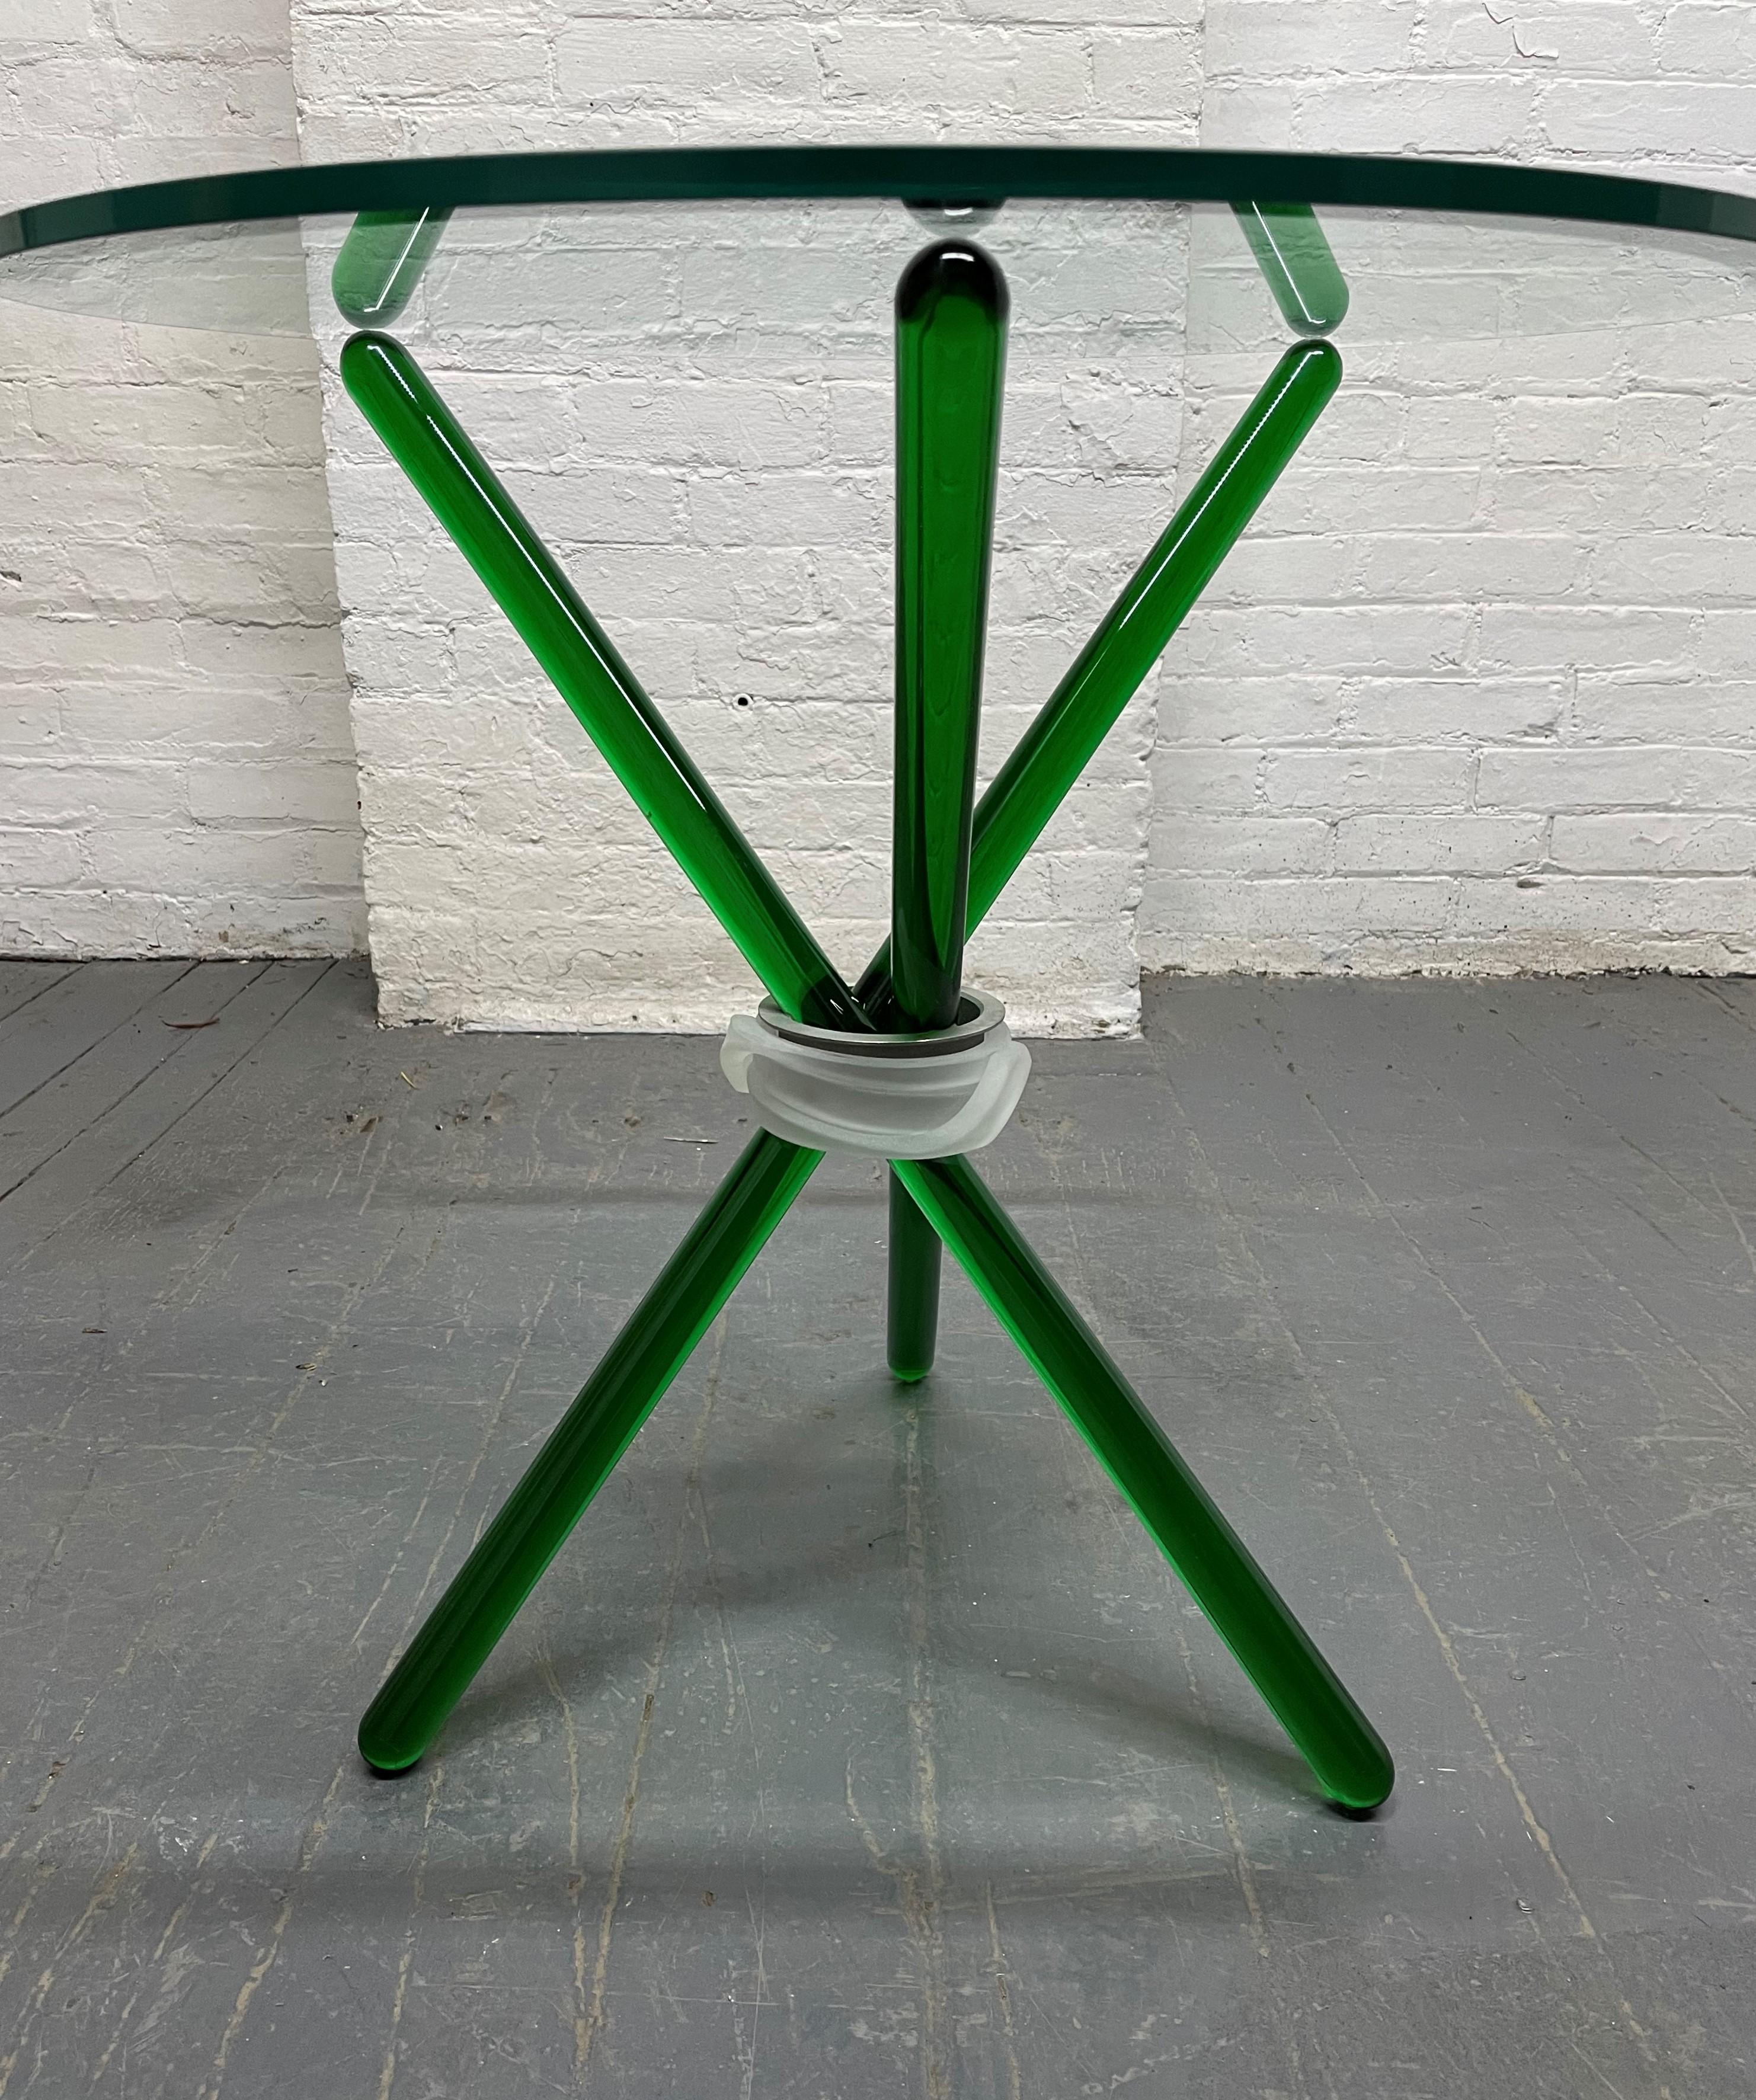 Green Murano glass side table. The table has a green Murano glass base, a frosted white glass decorative band to the center and a clear glass beveled glass top.